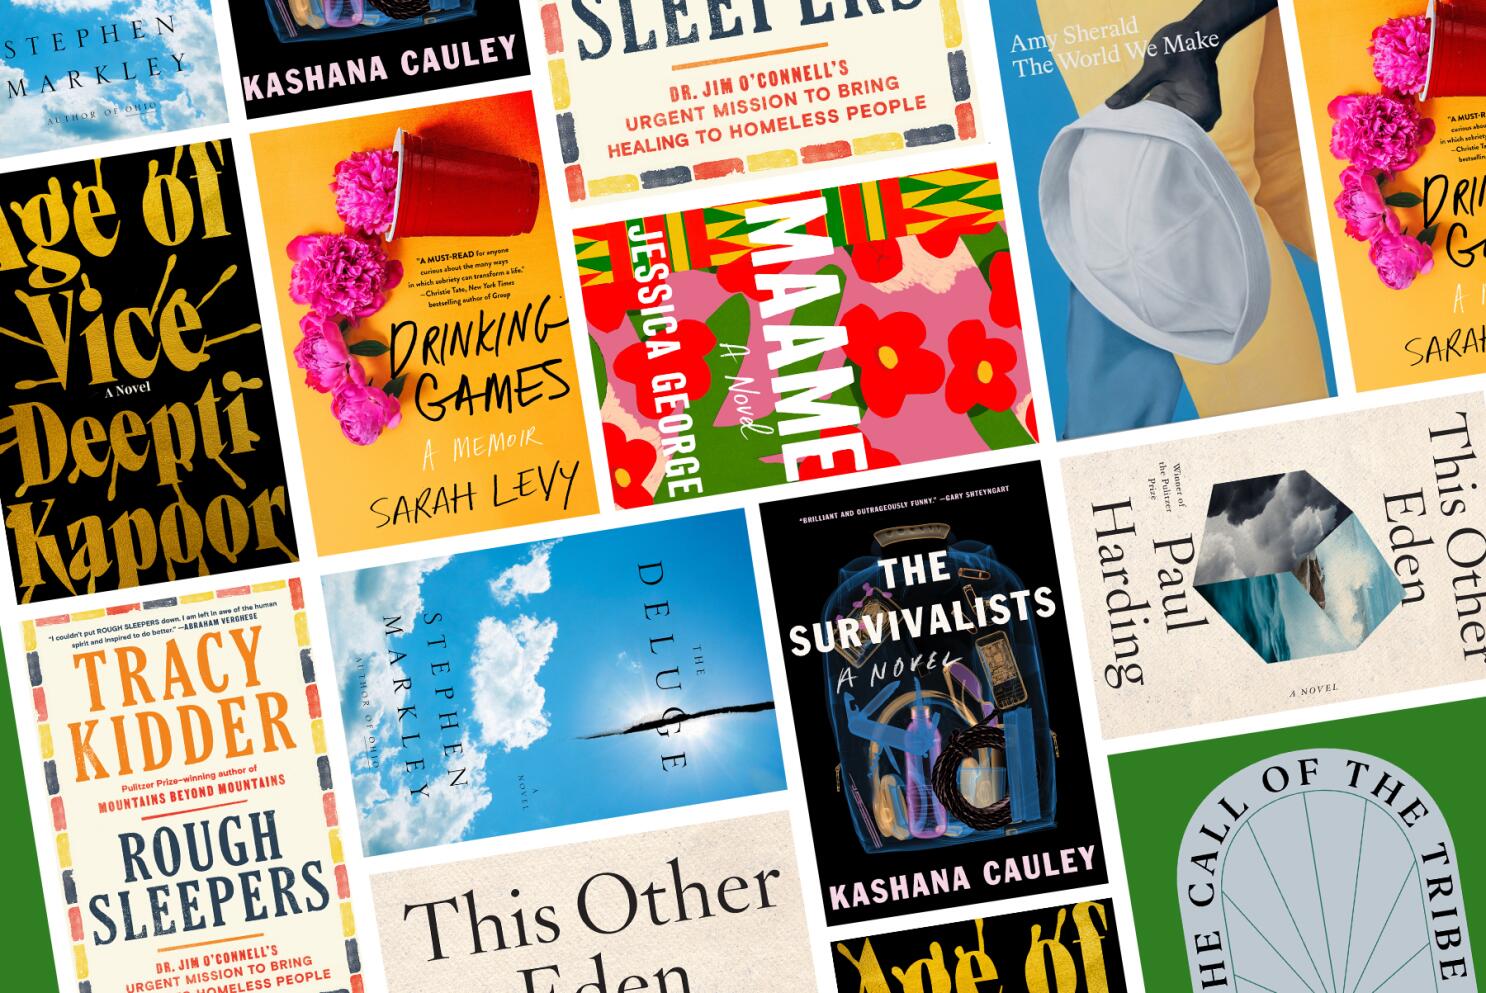 The 21 Best Fashion Books of All Time, According to Professors